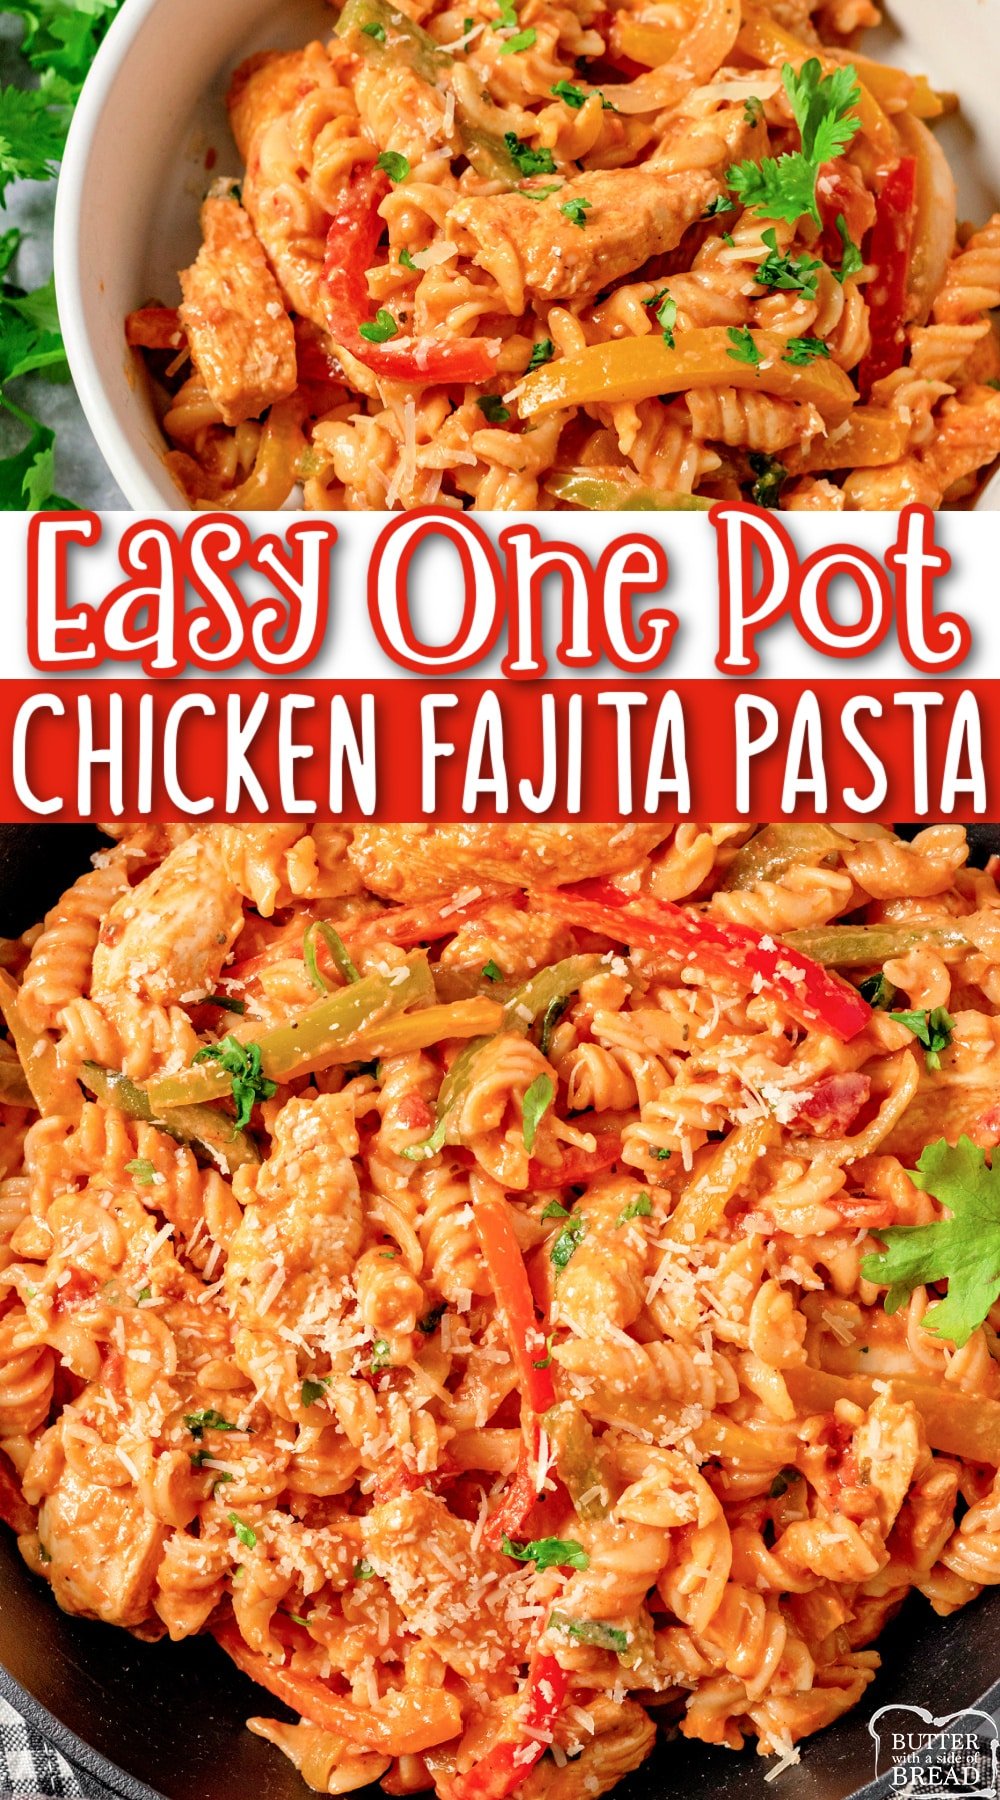 Chicken Fajita Pasta is creamy and loaded with flavor! Delicious one pot pasta recipe made with onions, peppers, cheese and chicken.